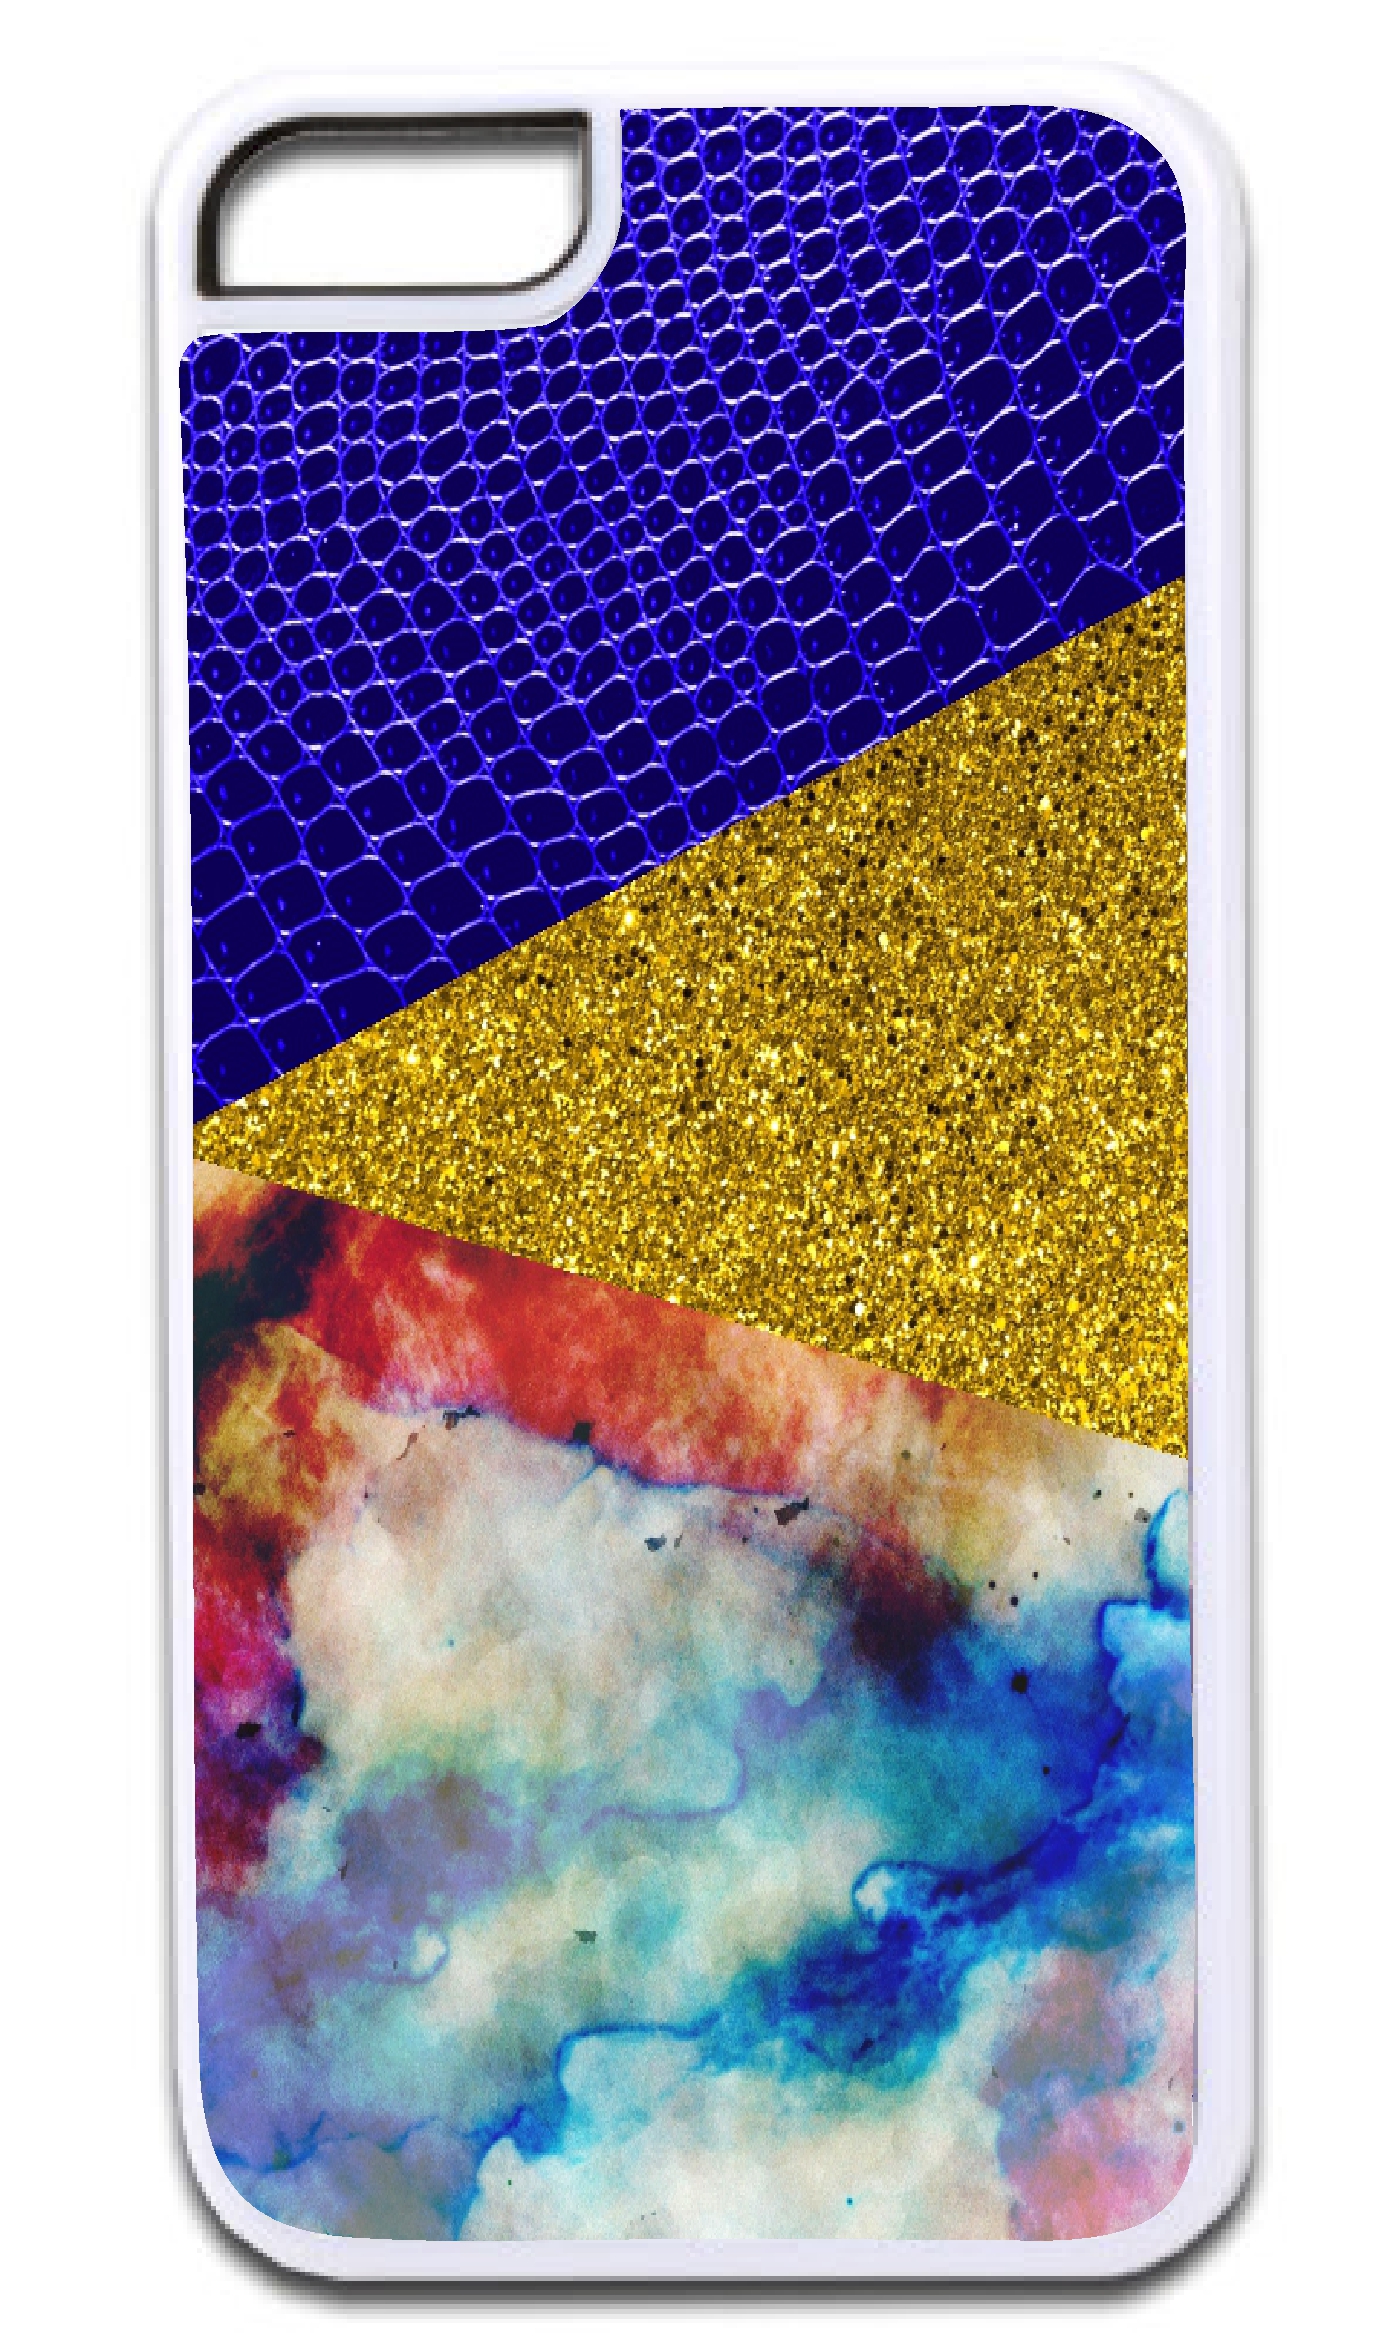 Blue Snakeskin Faux Gold Glitter and Colored Marble Print Design White Rubber Case for the Apple iPhone 7 Plus / 7+ / iPhone 8 Plus / 8+ iphone 7p Accessories - iphone 8p Accessories - image 1 of 2